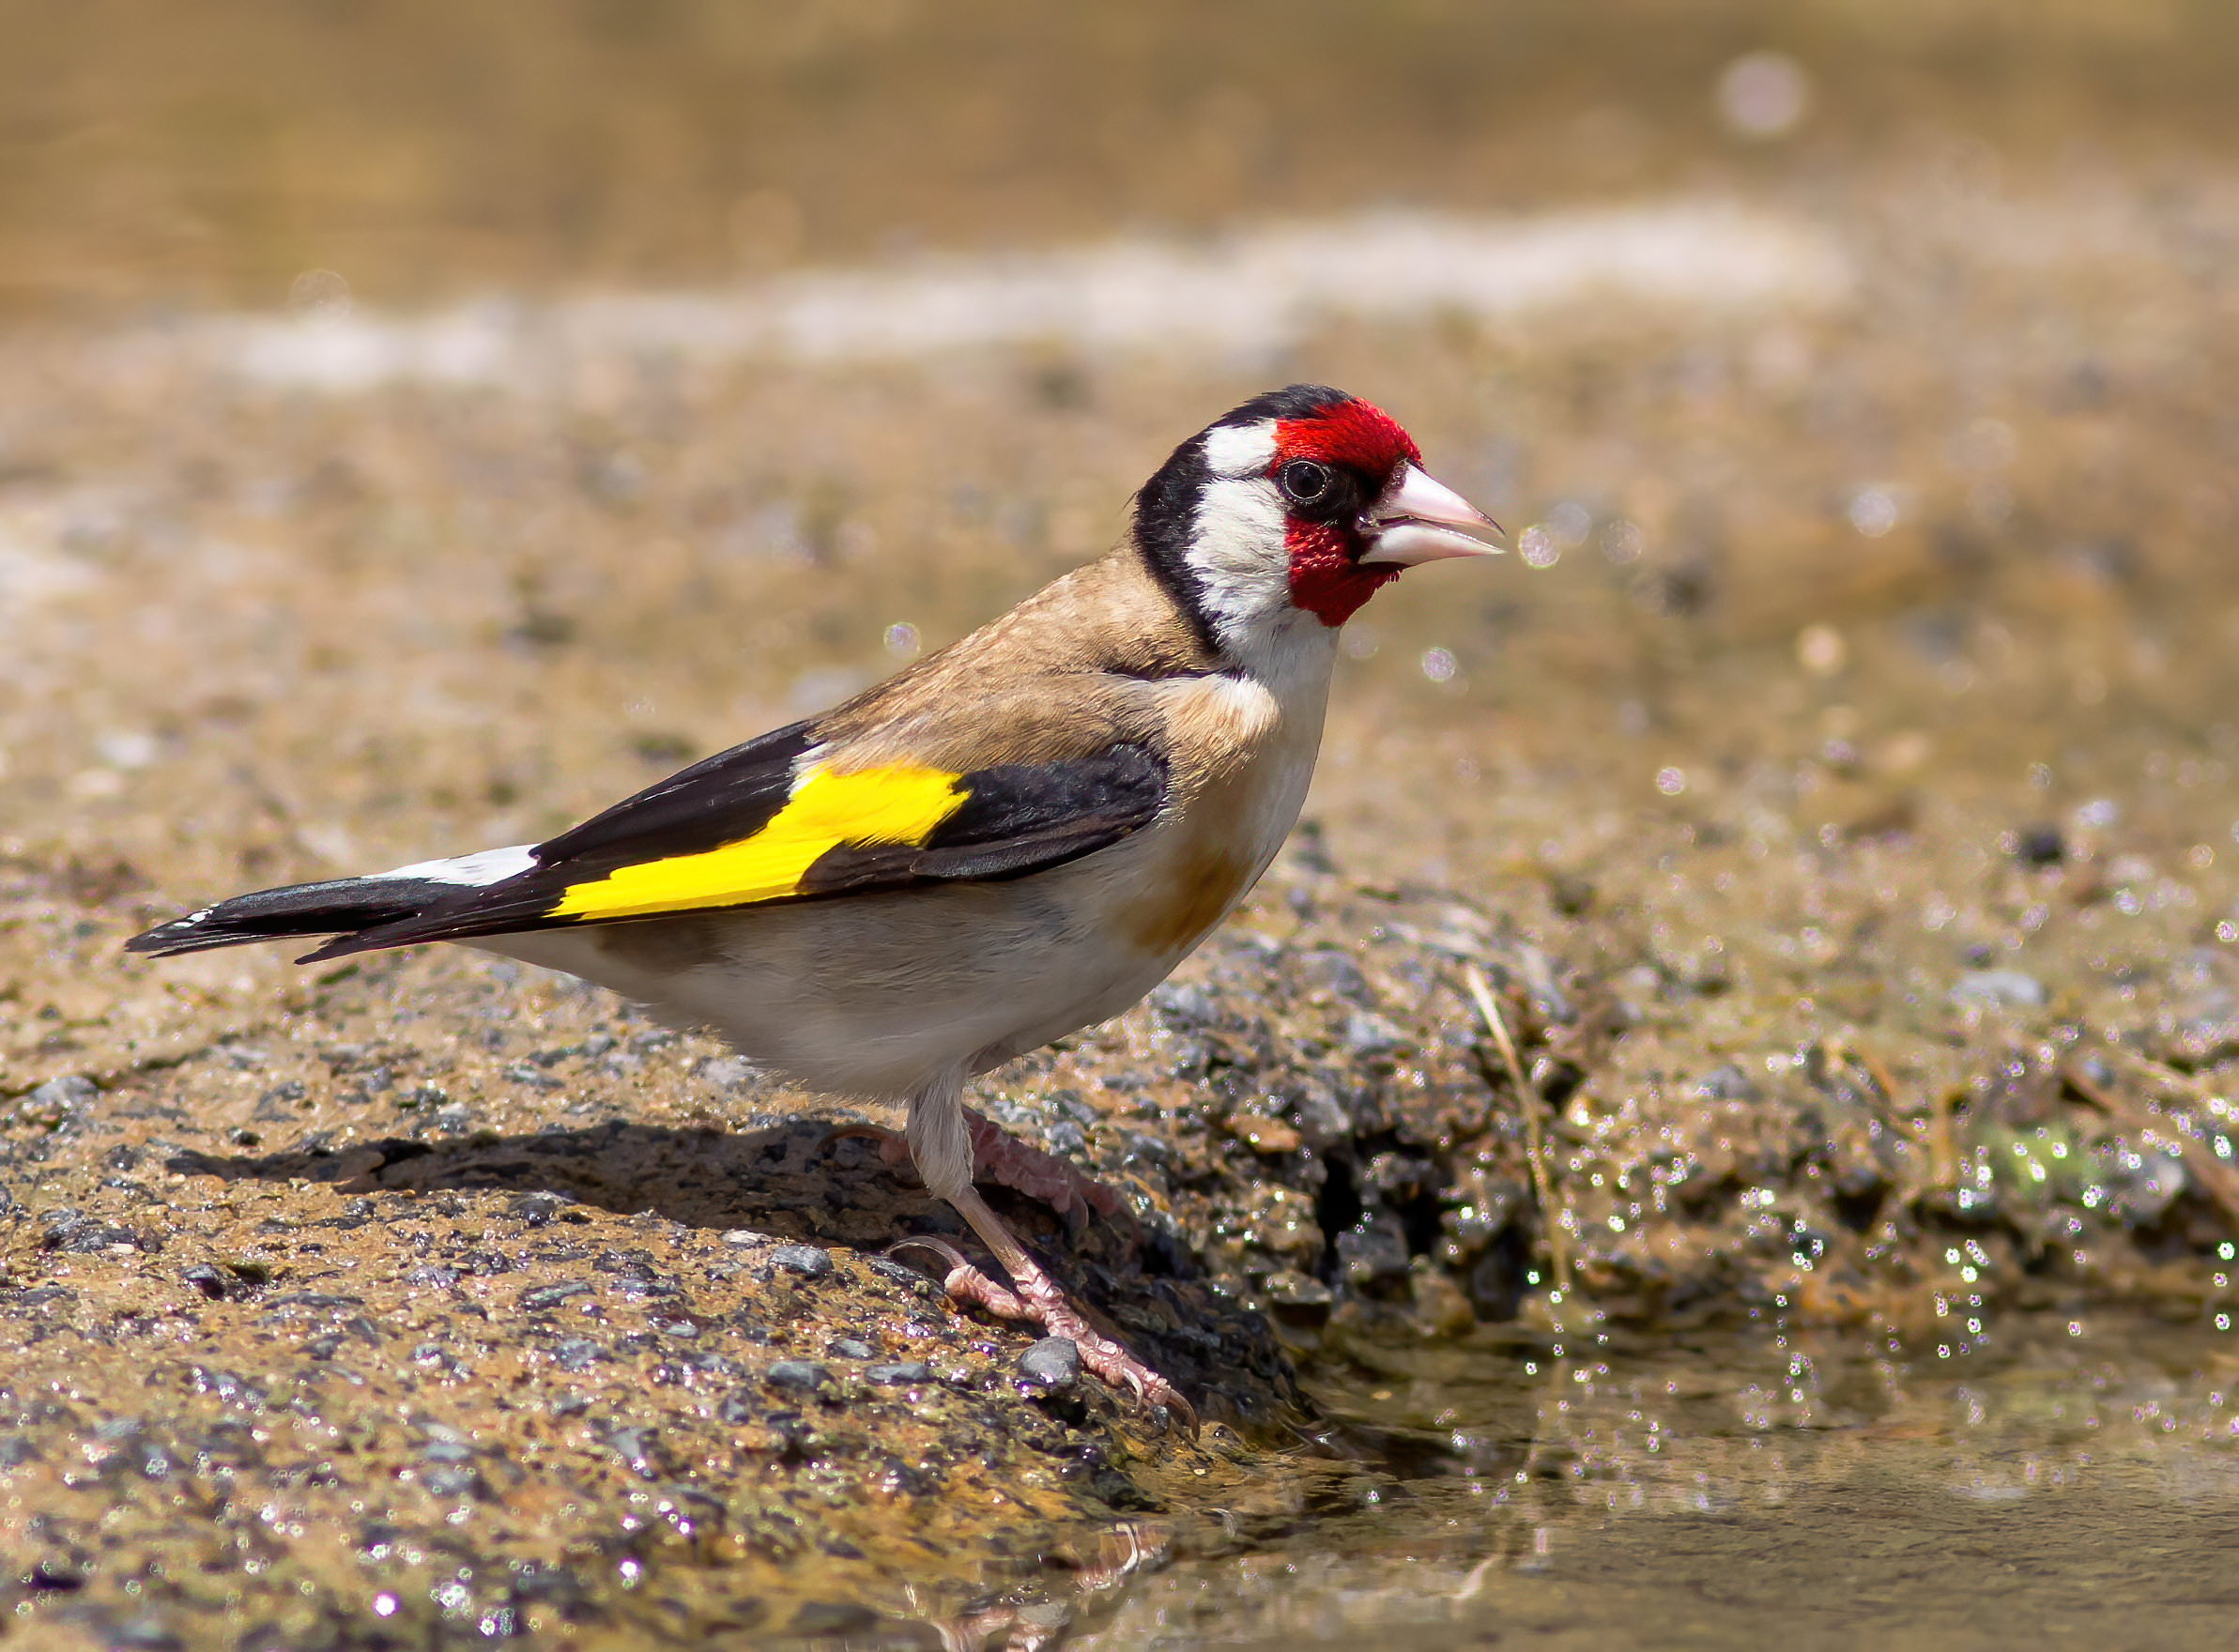 Yet another goldfinch....